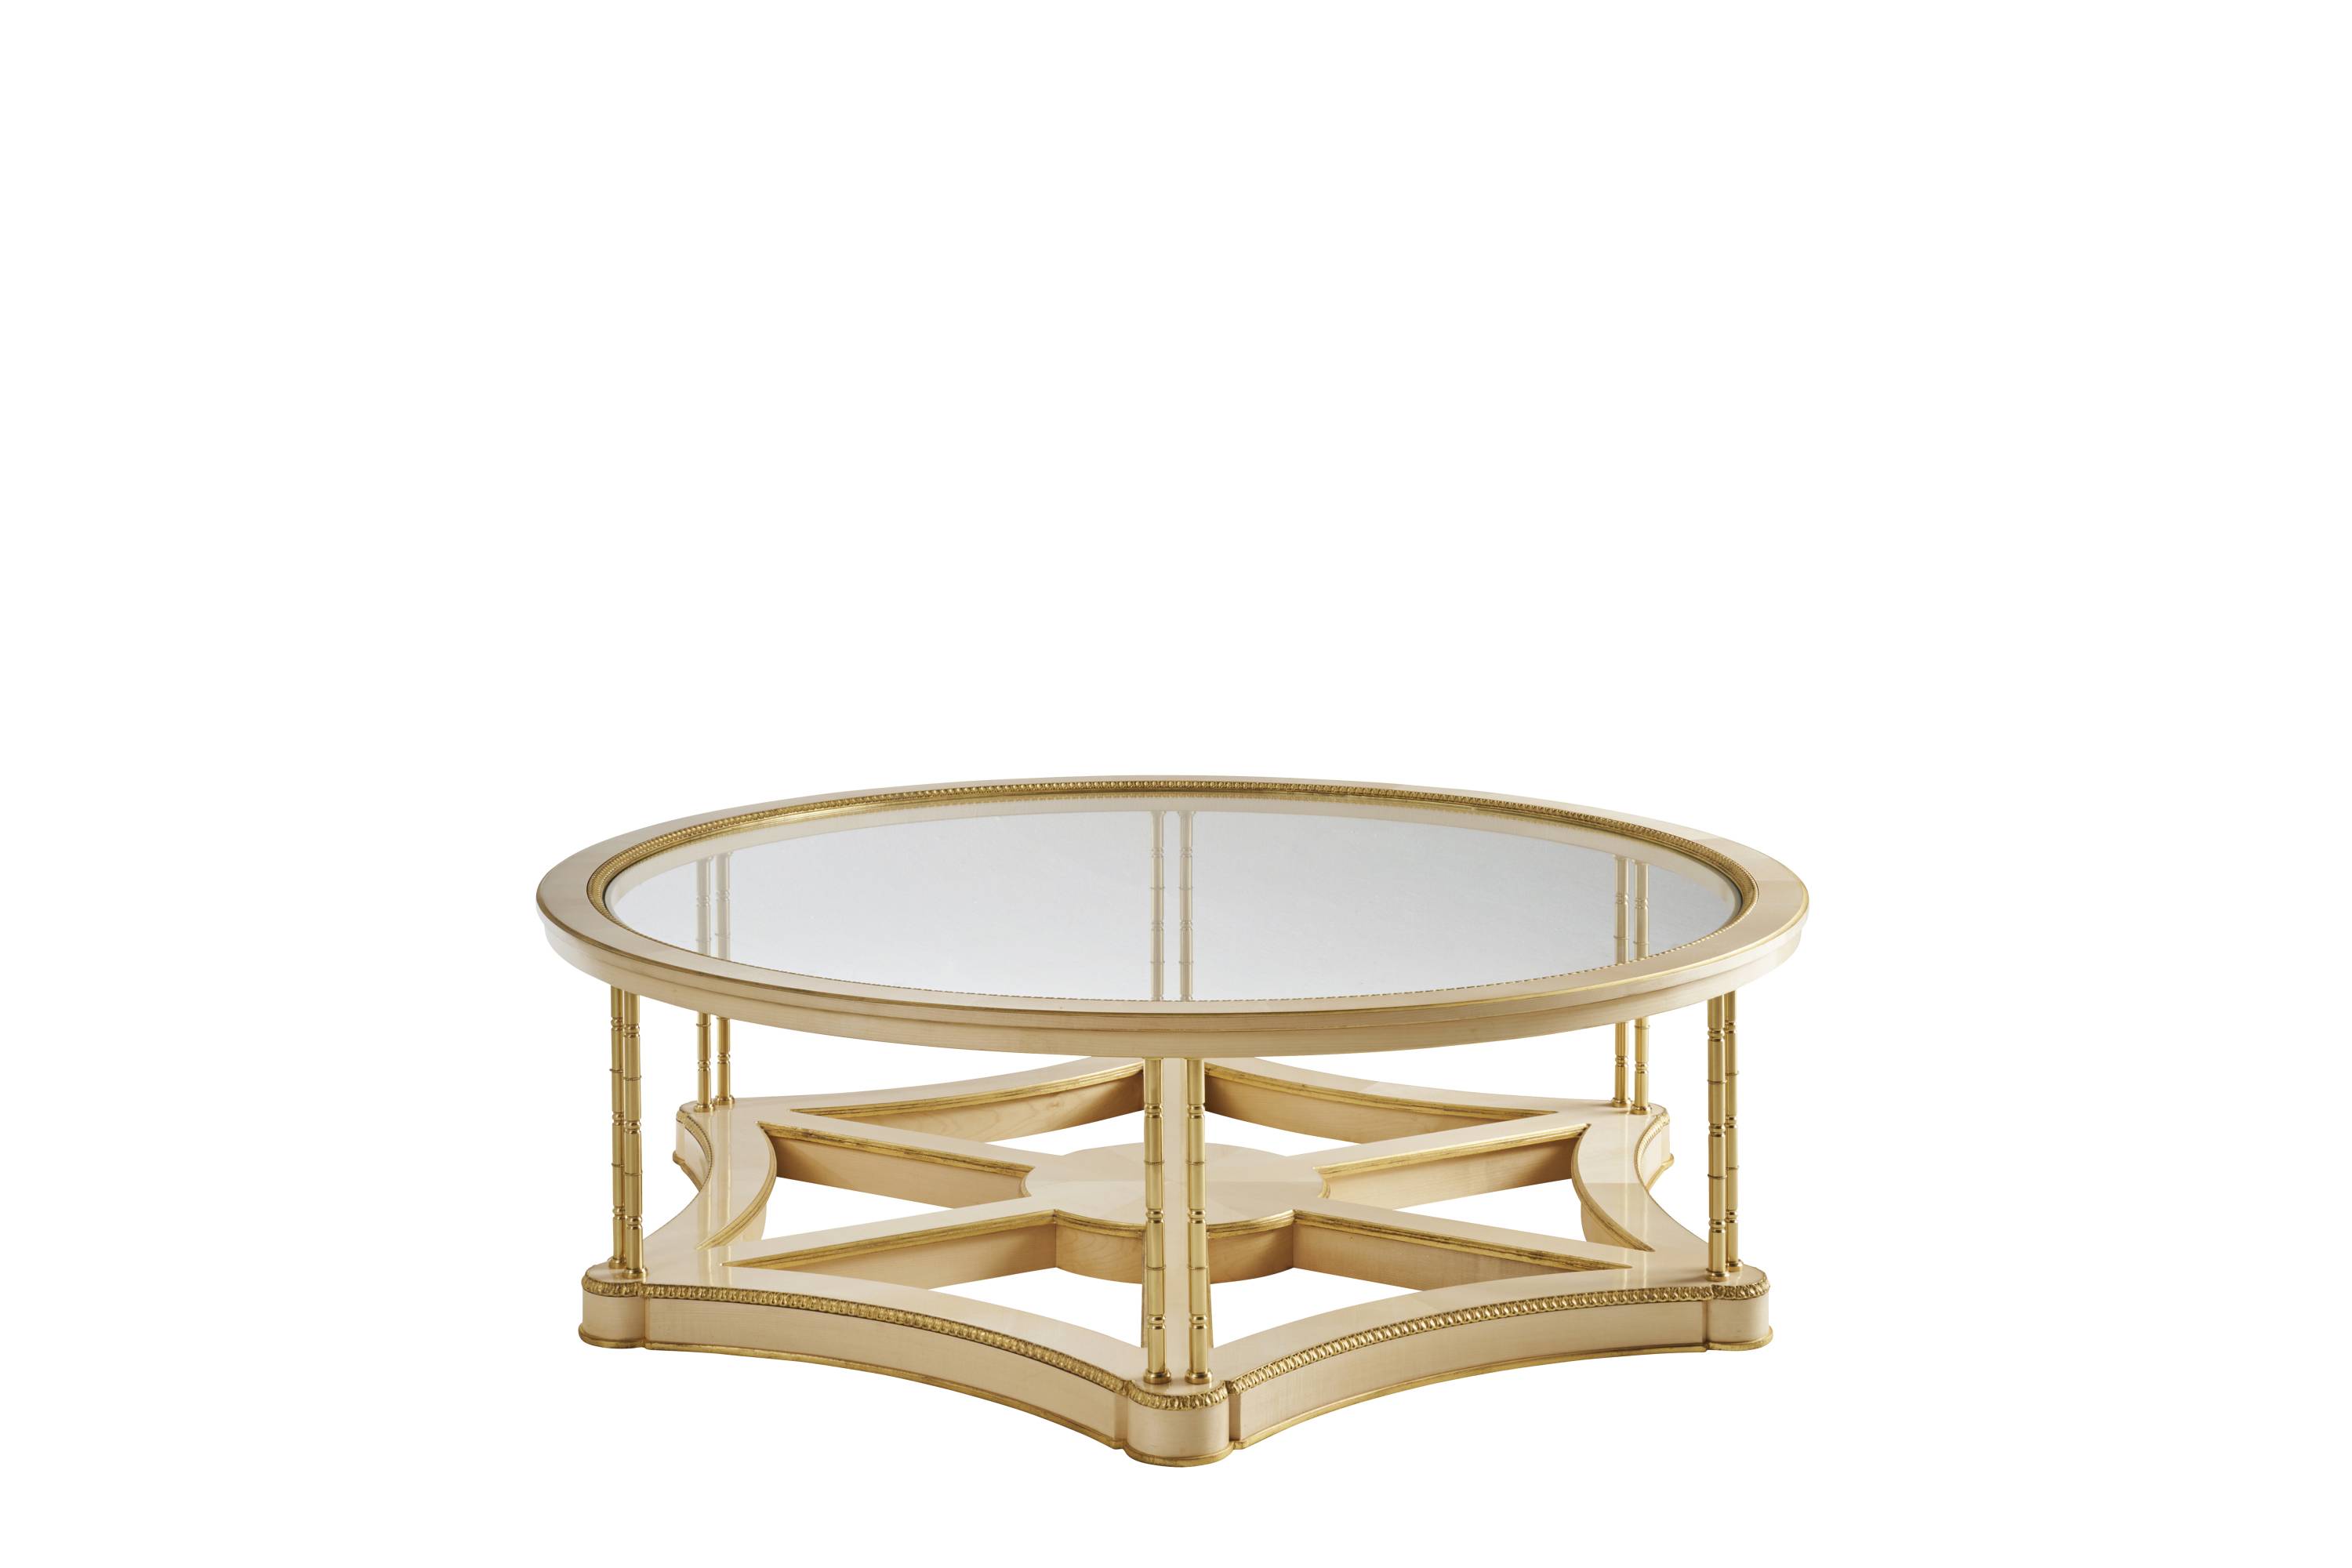 BELLE VIE low table - convey elegance to each space with italian classic low tables of the classic Héritage collection